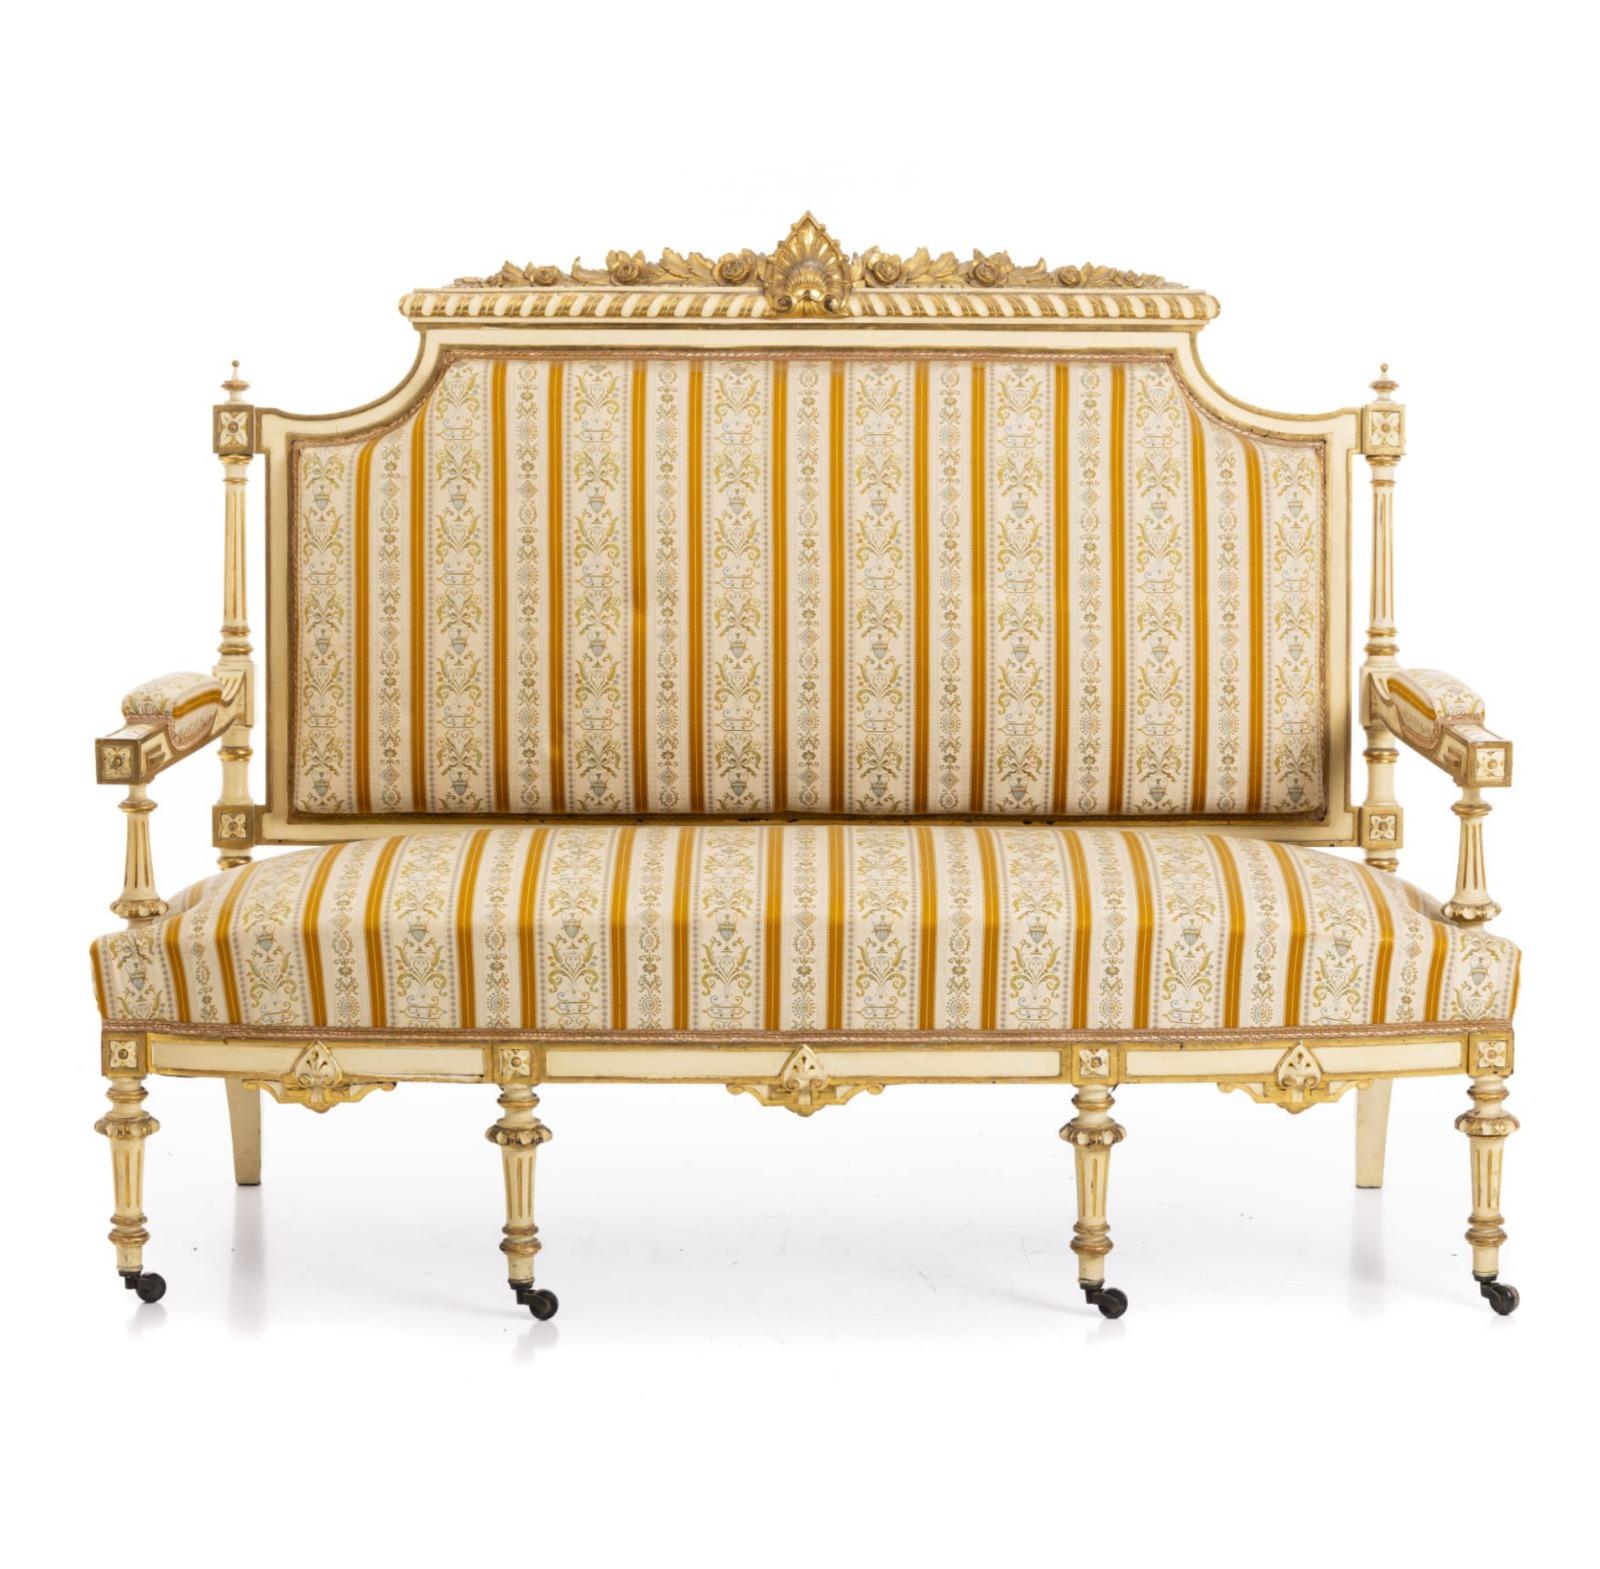 FRENCH CANAPÉ AND PAIR OF CHAIRS STYLE LOUIS XVI 19th Century

Louis XVI style, in carved and gilded wood with plant elements, castors on the front legs, seat and back upholstered in fabric with floral motifs. 19th century.
Dim.:124x165x61cm

Louis